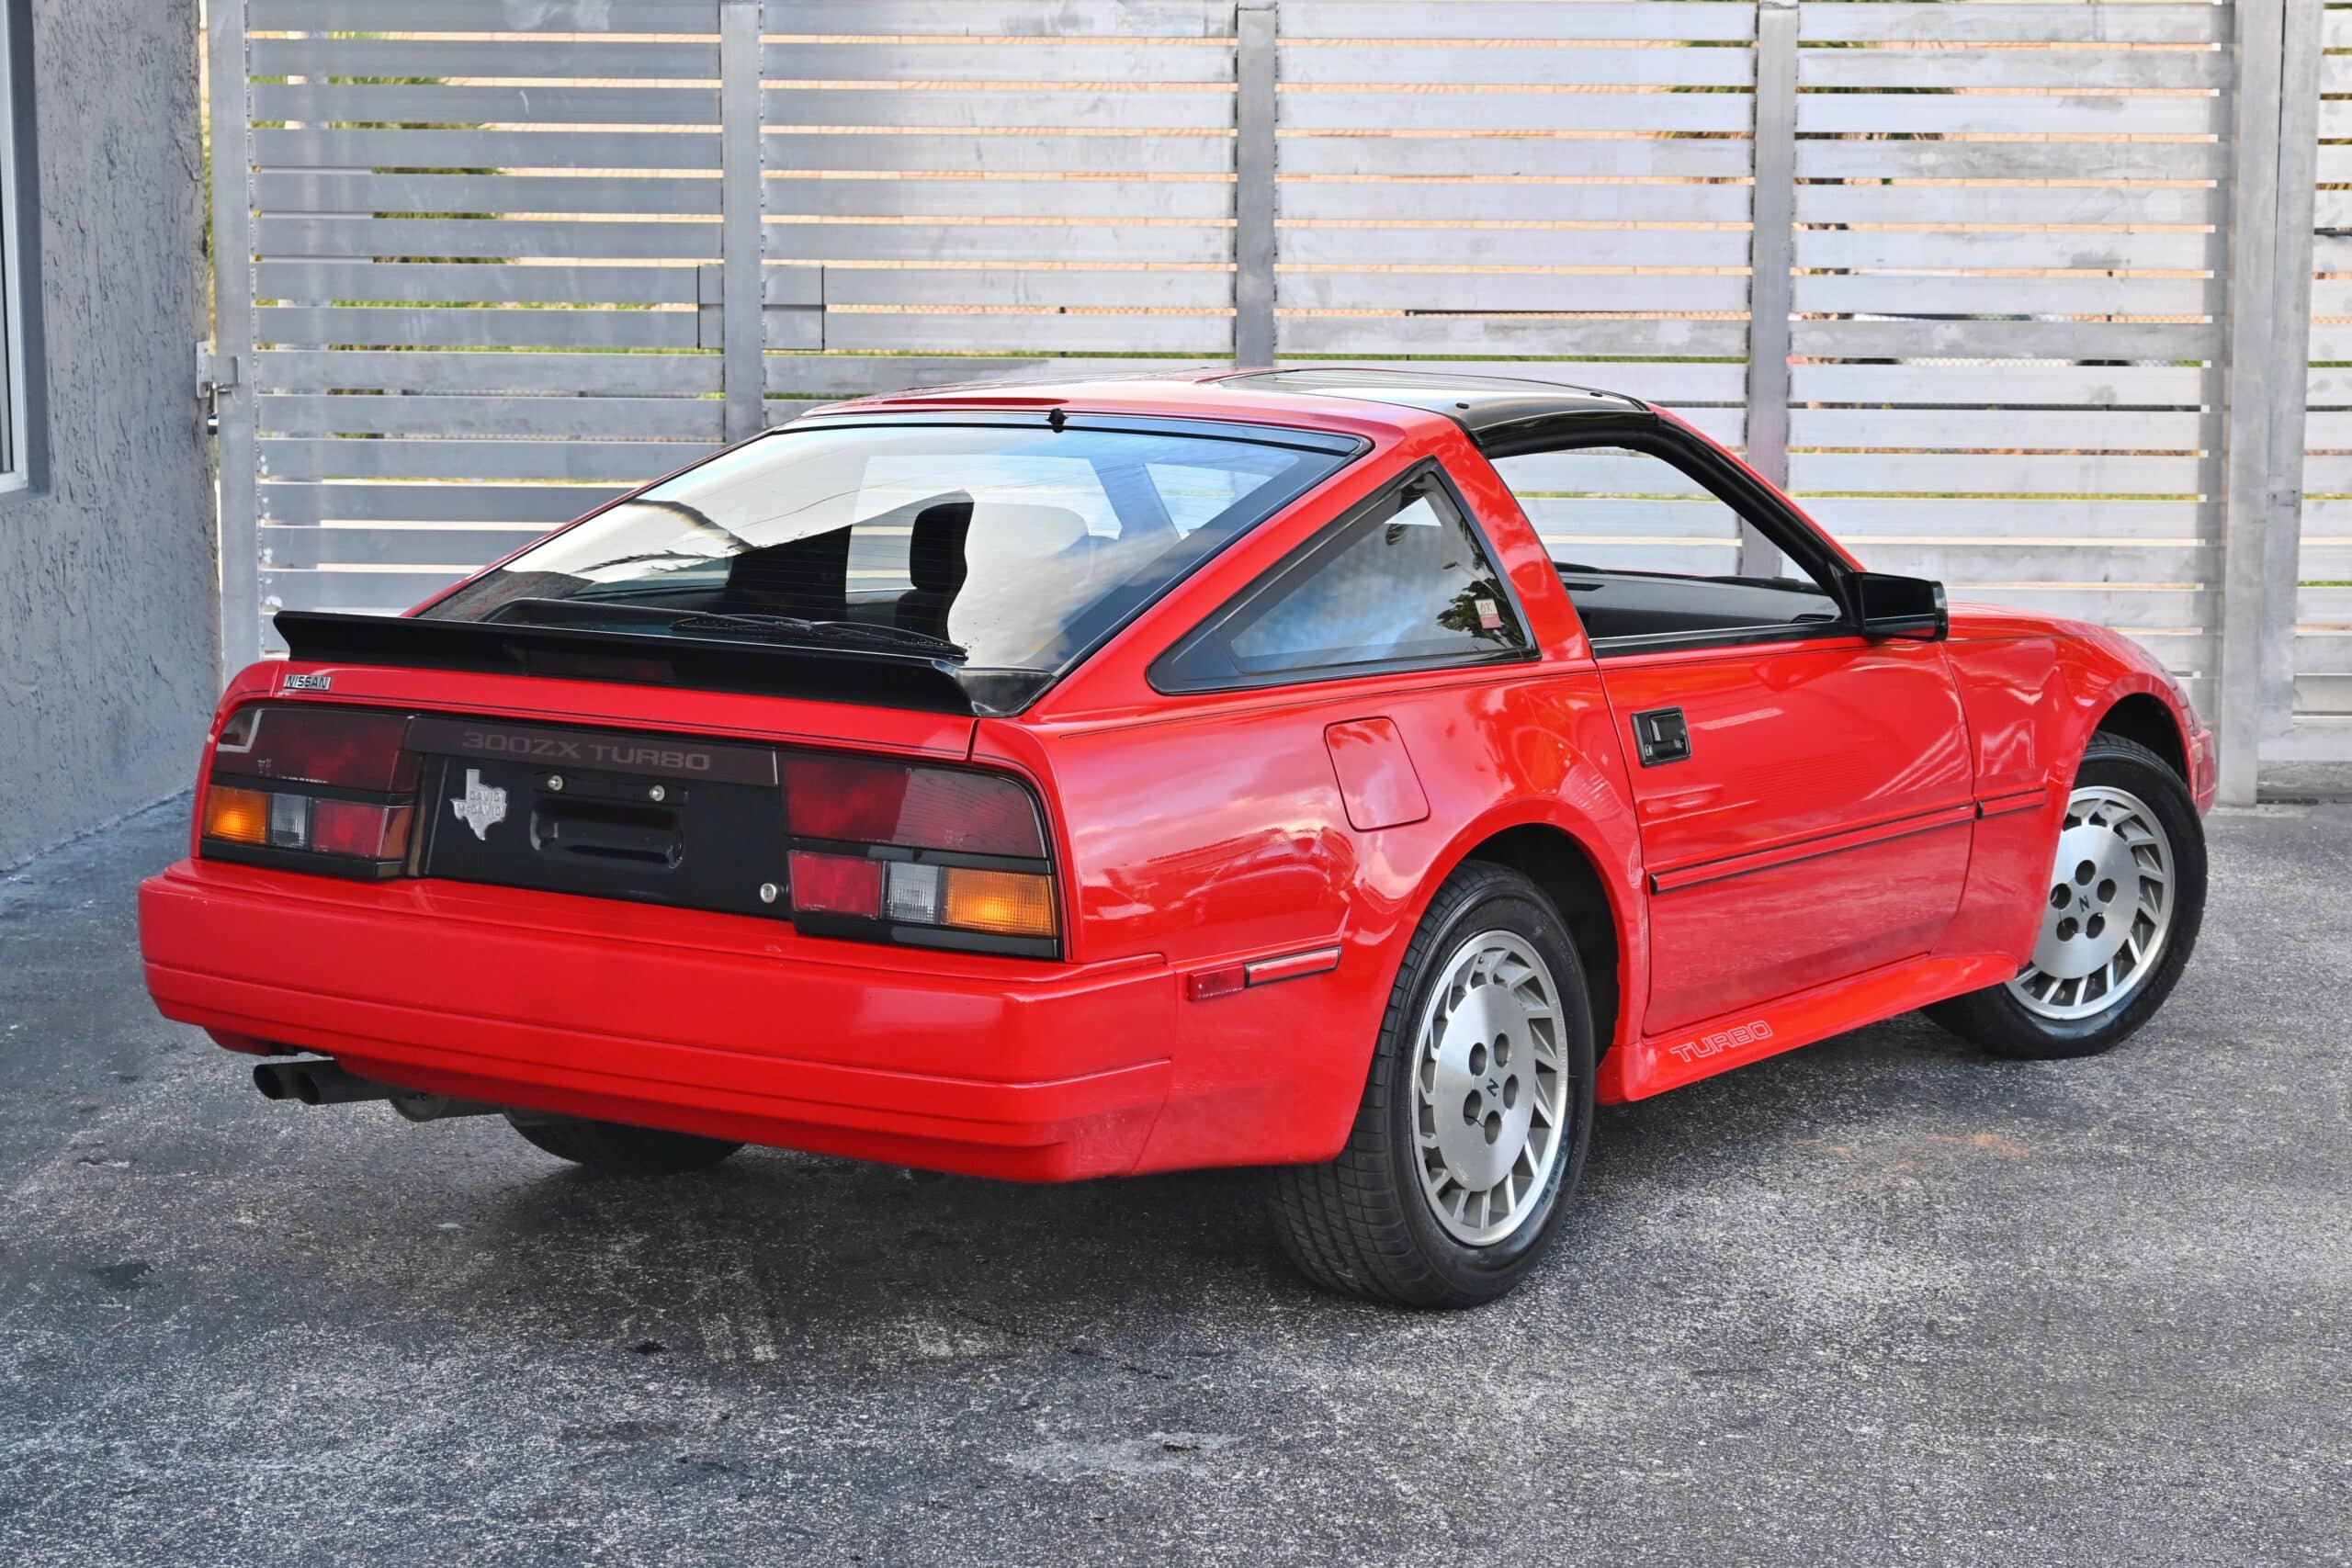 1986 Nissan 300ZX TURBO 2 Owner -ONLY 21K ORIGINAL MILES-Original Paint- 5 Speed Manual-Timing belt done